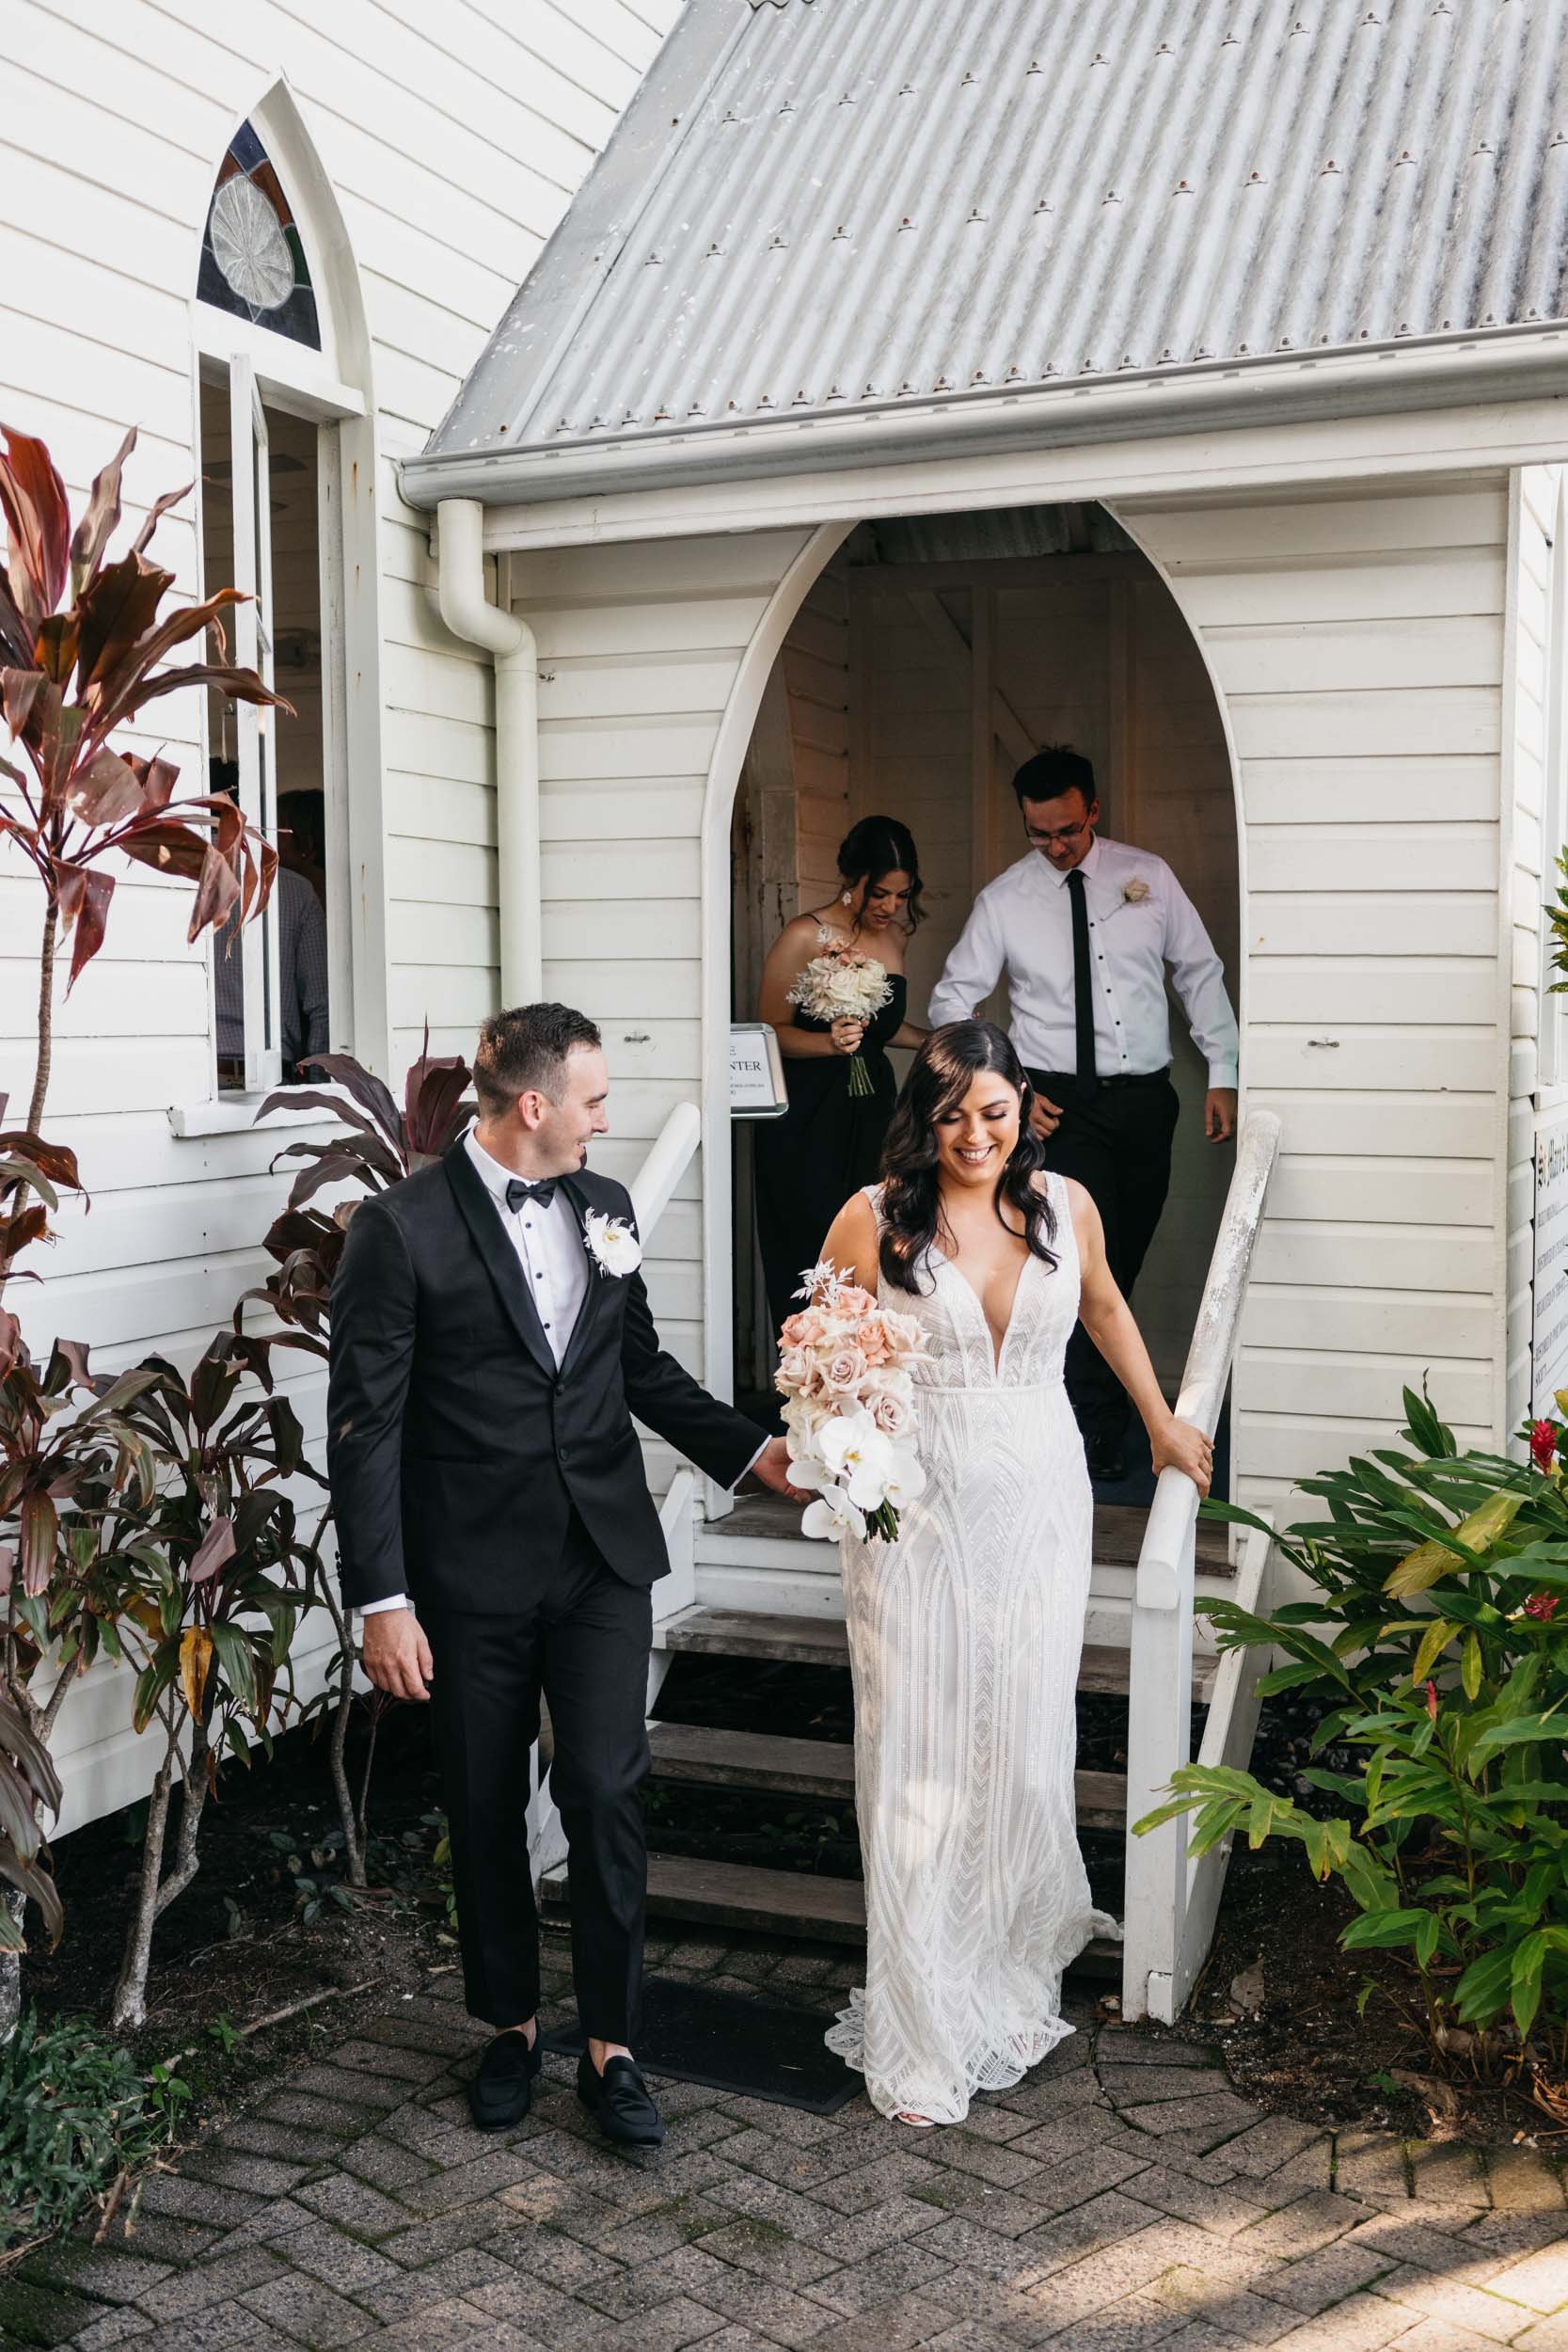 The Raw Photographer - Cairns Wedding Photographer - Port Douglas ceremony venues and locations ST MARYS-8.jpg